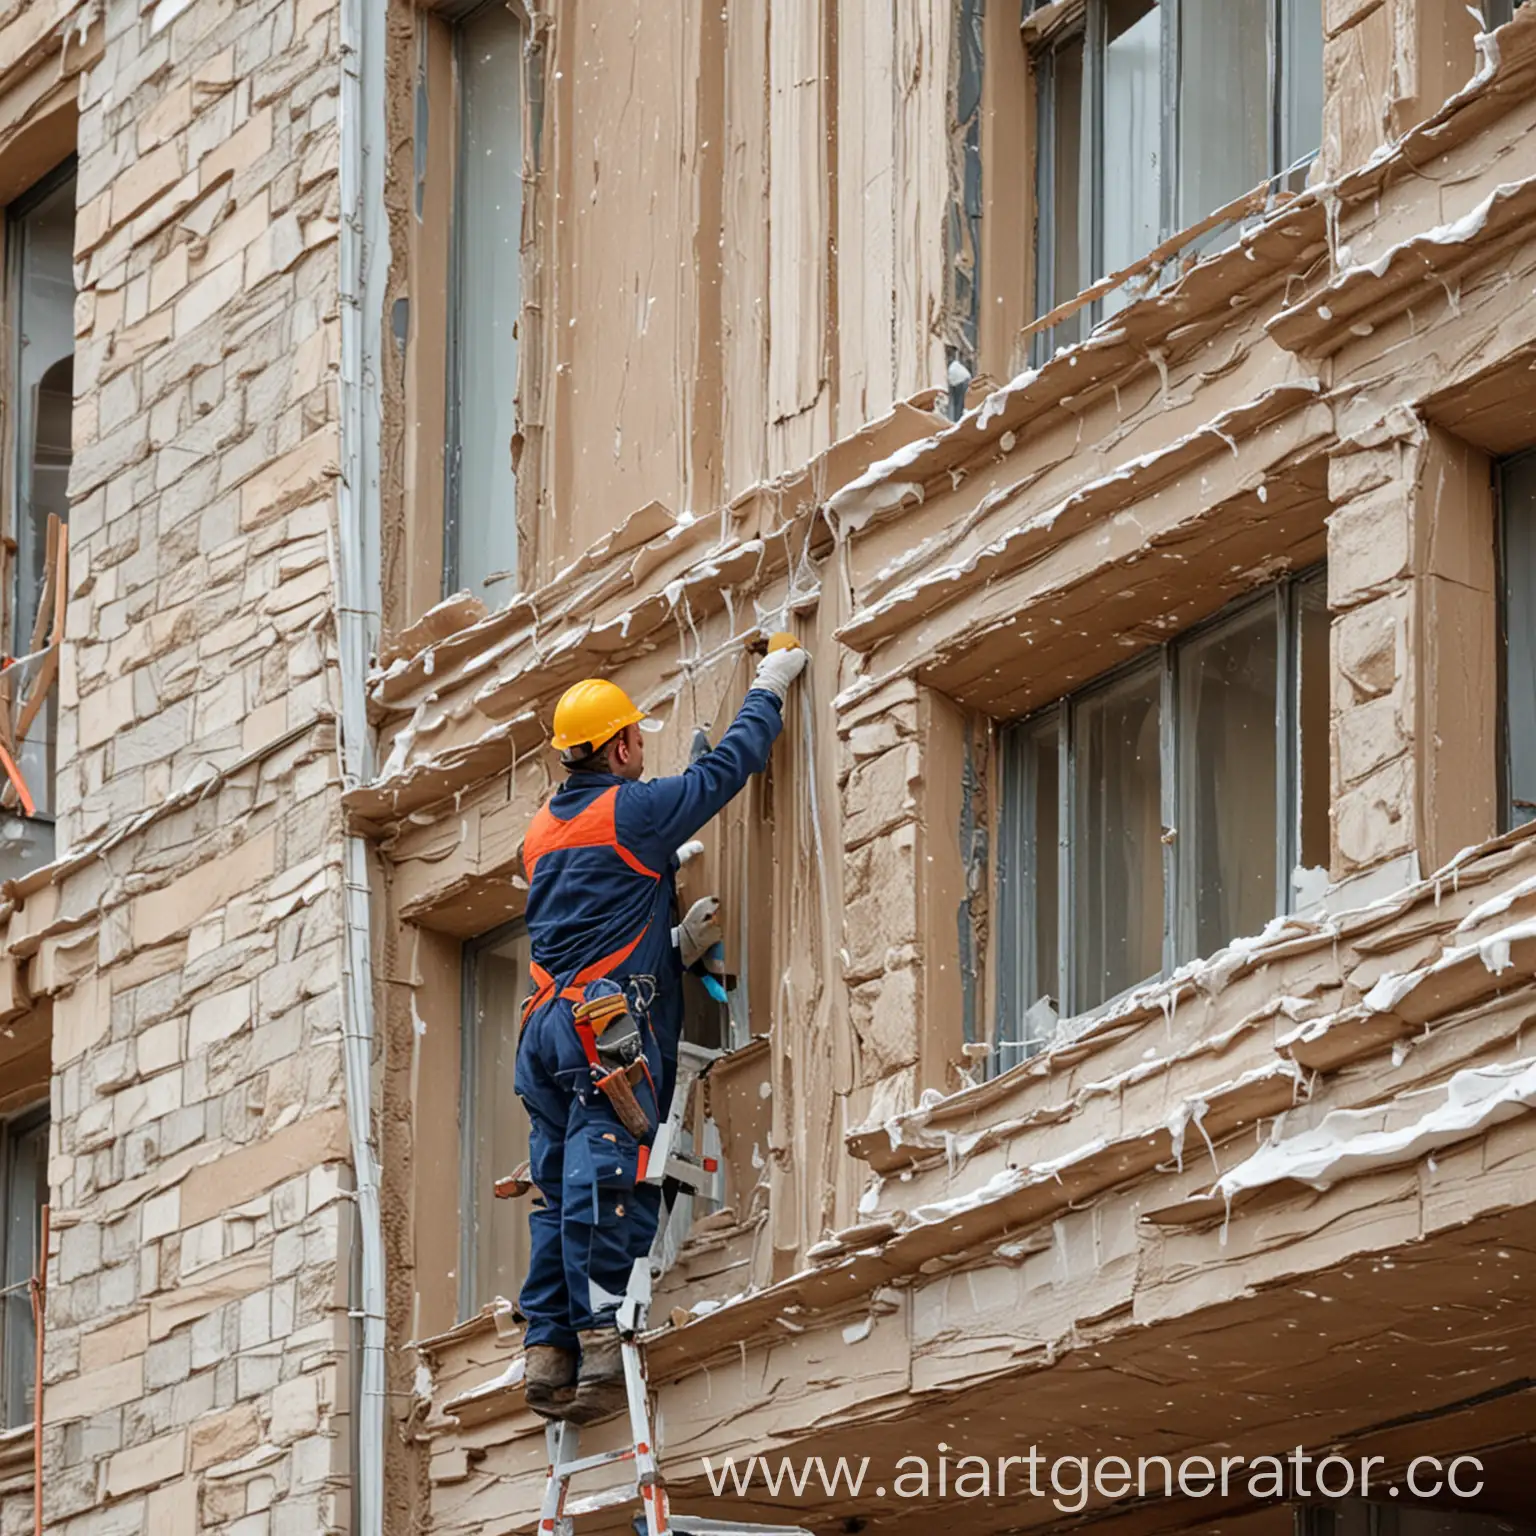 Facade-Decoration-Worker-Gluing-Ornamental-Features-to-a-Building